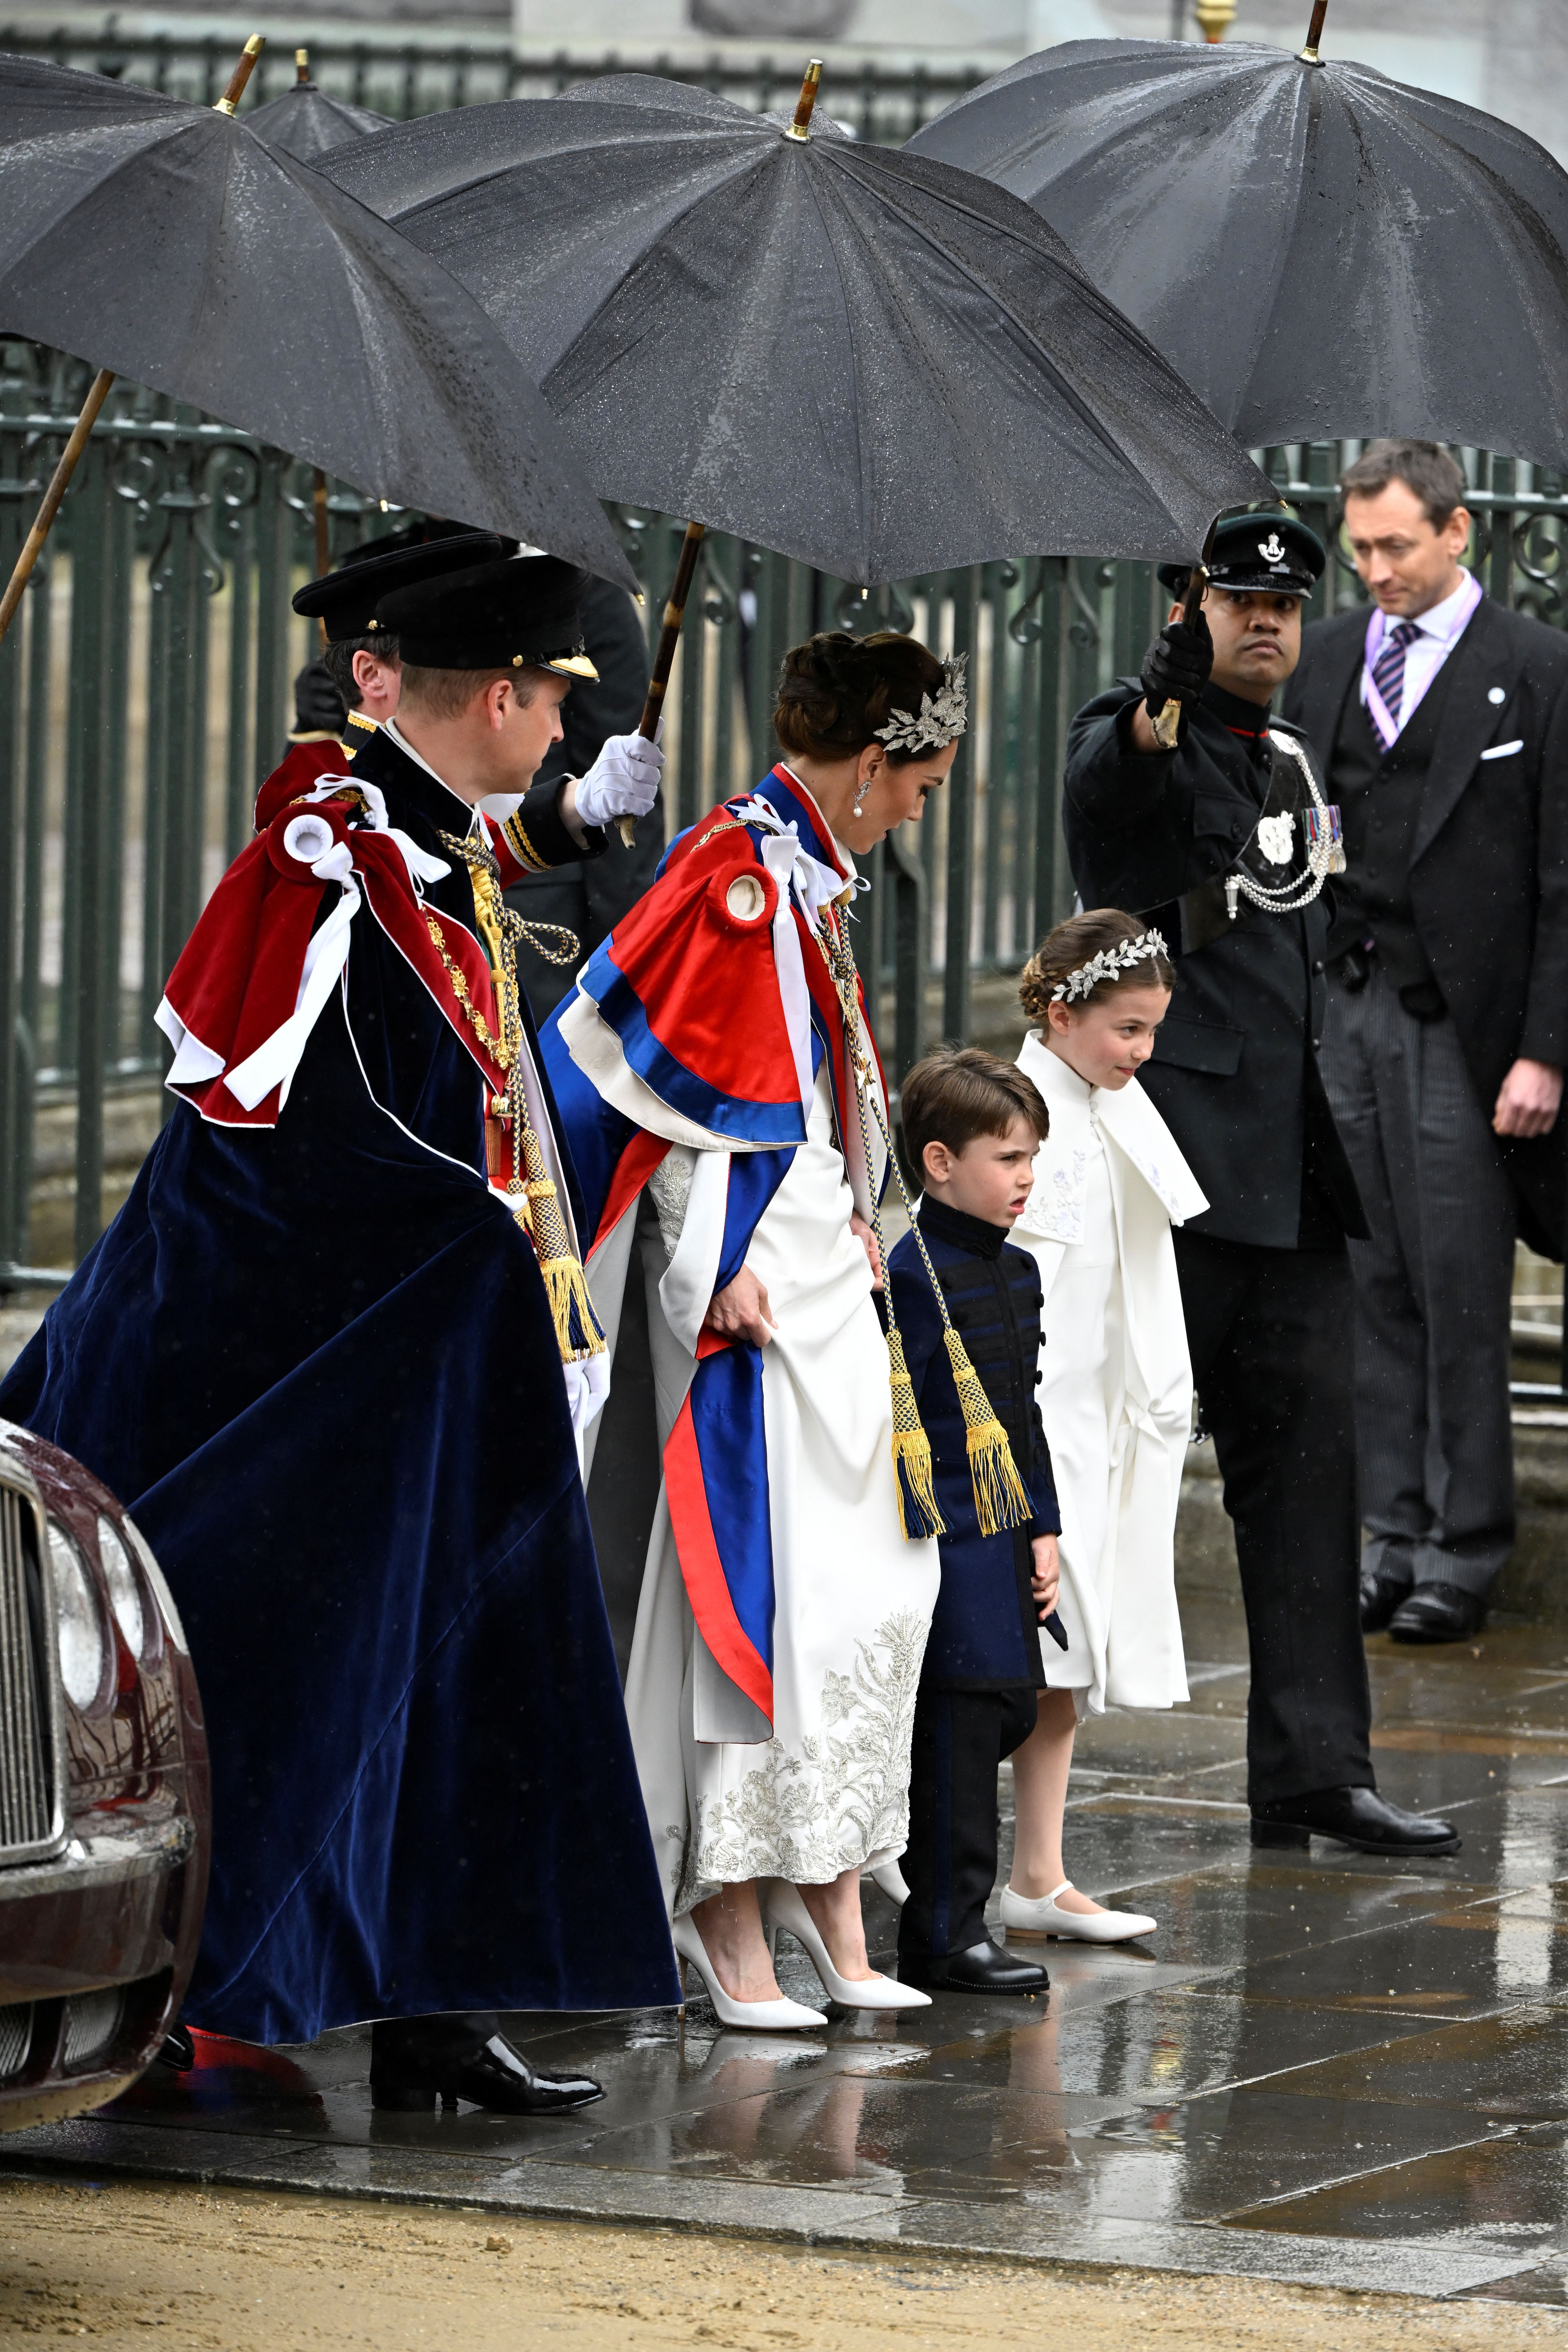 Prince William, Catherine, Princess of Wales, and their children Princess Charlottte and Prince Louis arrive at the Coronation of King Charles III 